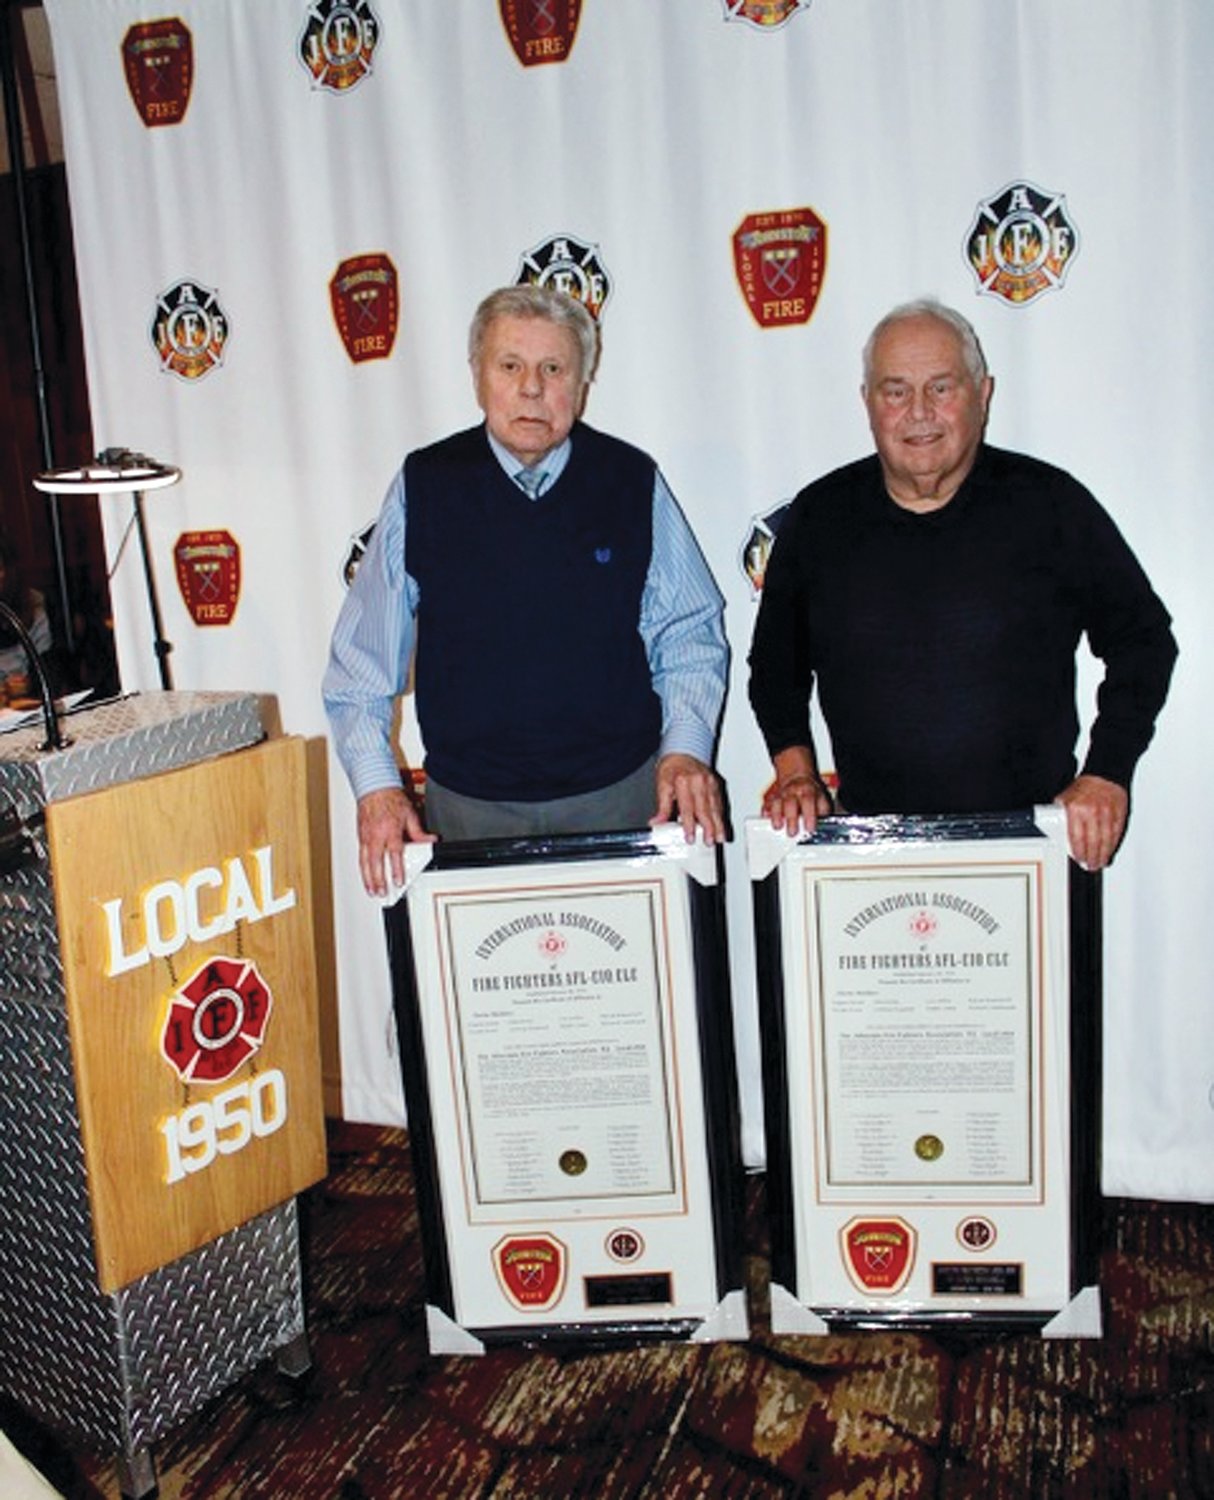 GRAND GIFTS: Local 1950 presented frame copies of the original IAFF Charter to first-ever President Clayton Quick and Al Masciarelli during the recent 50th-anniversary celebration.